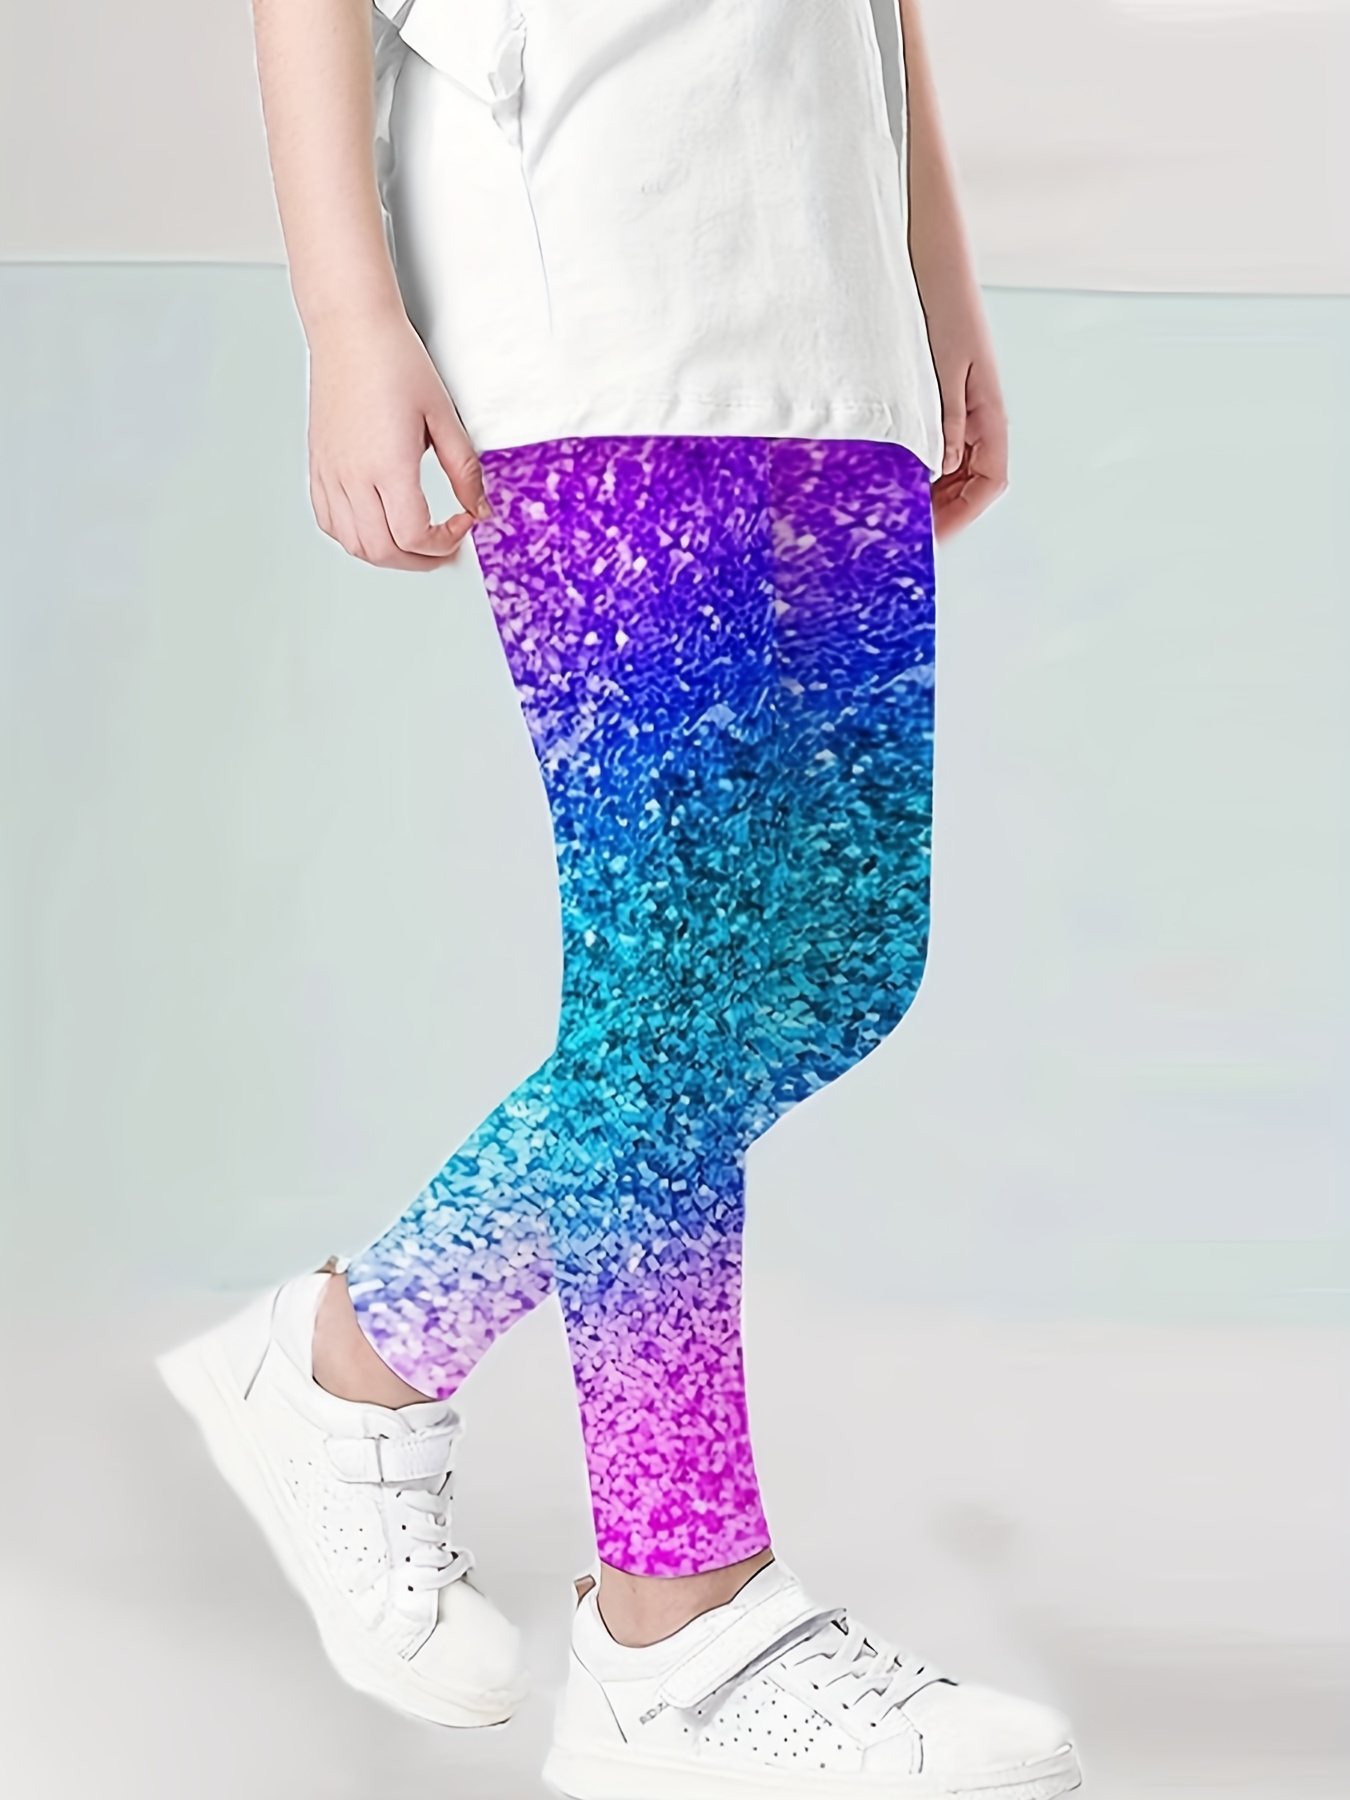 Girls Trendy Sequin Effect Leggings Comfy &breathable Pants For Everyday,  Sports, Yoga